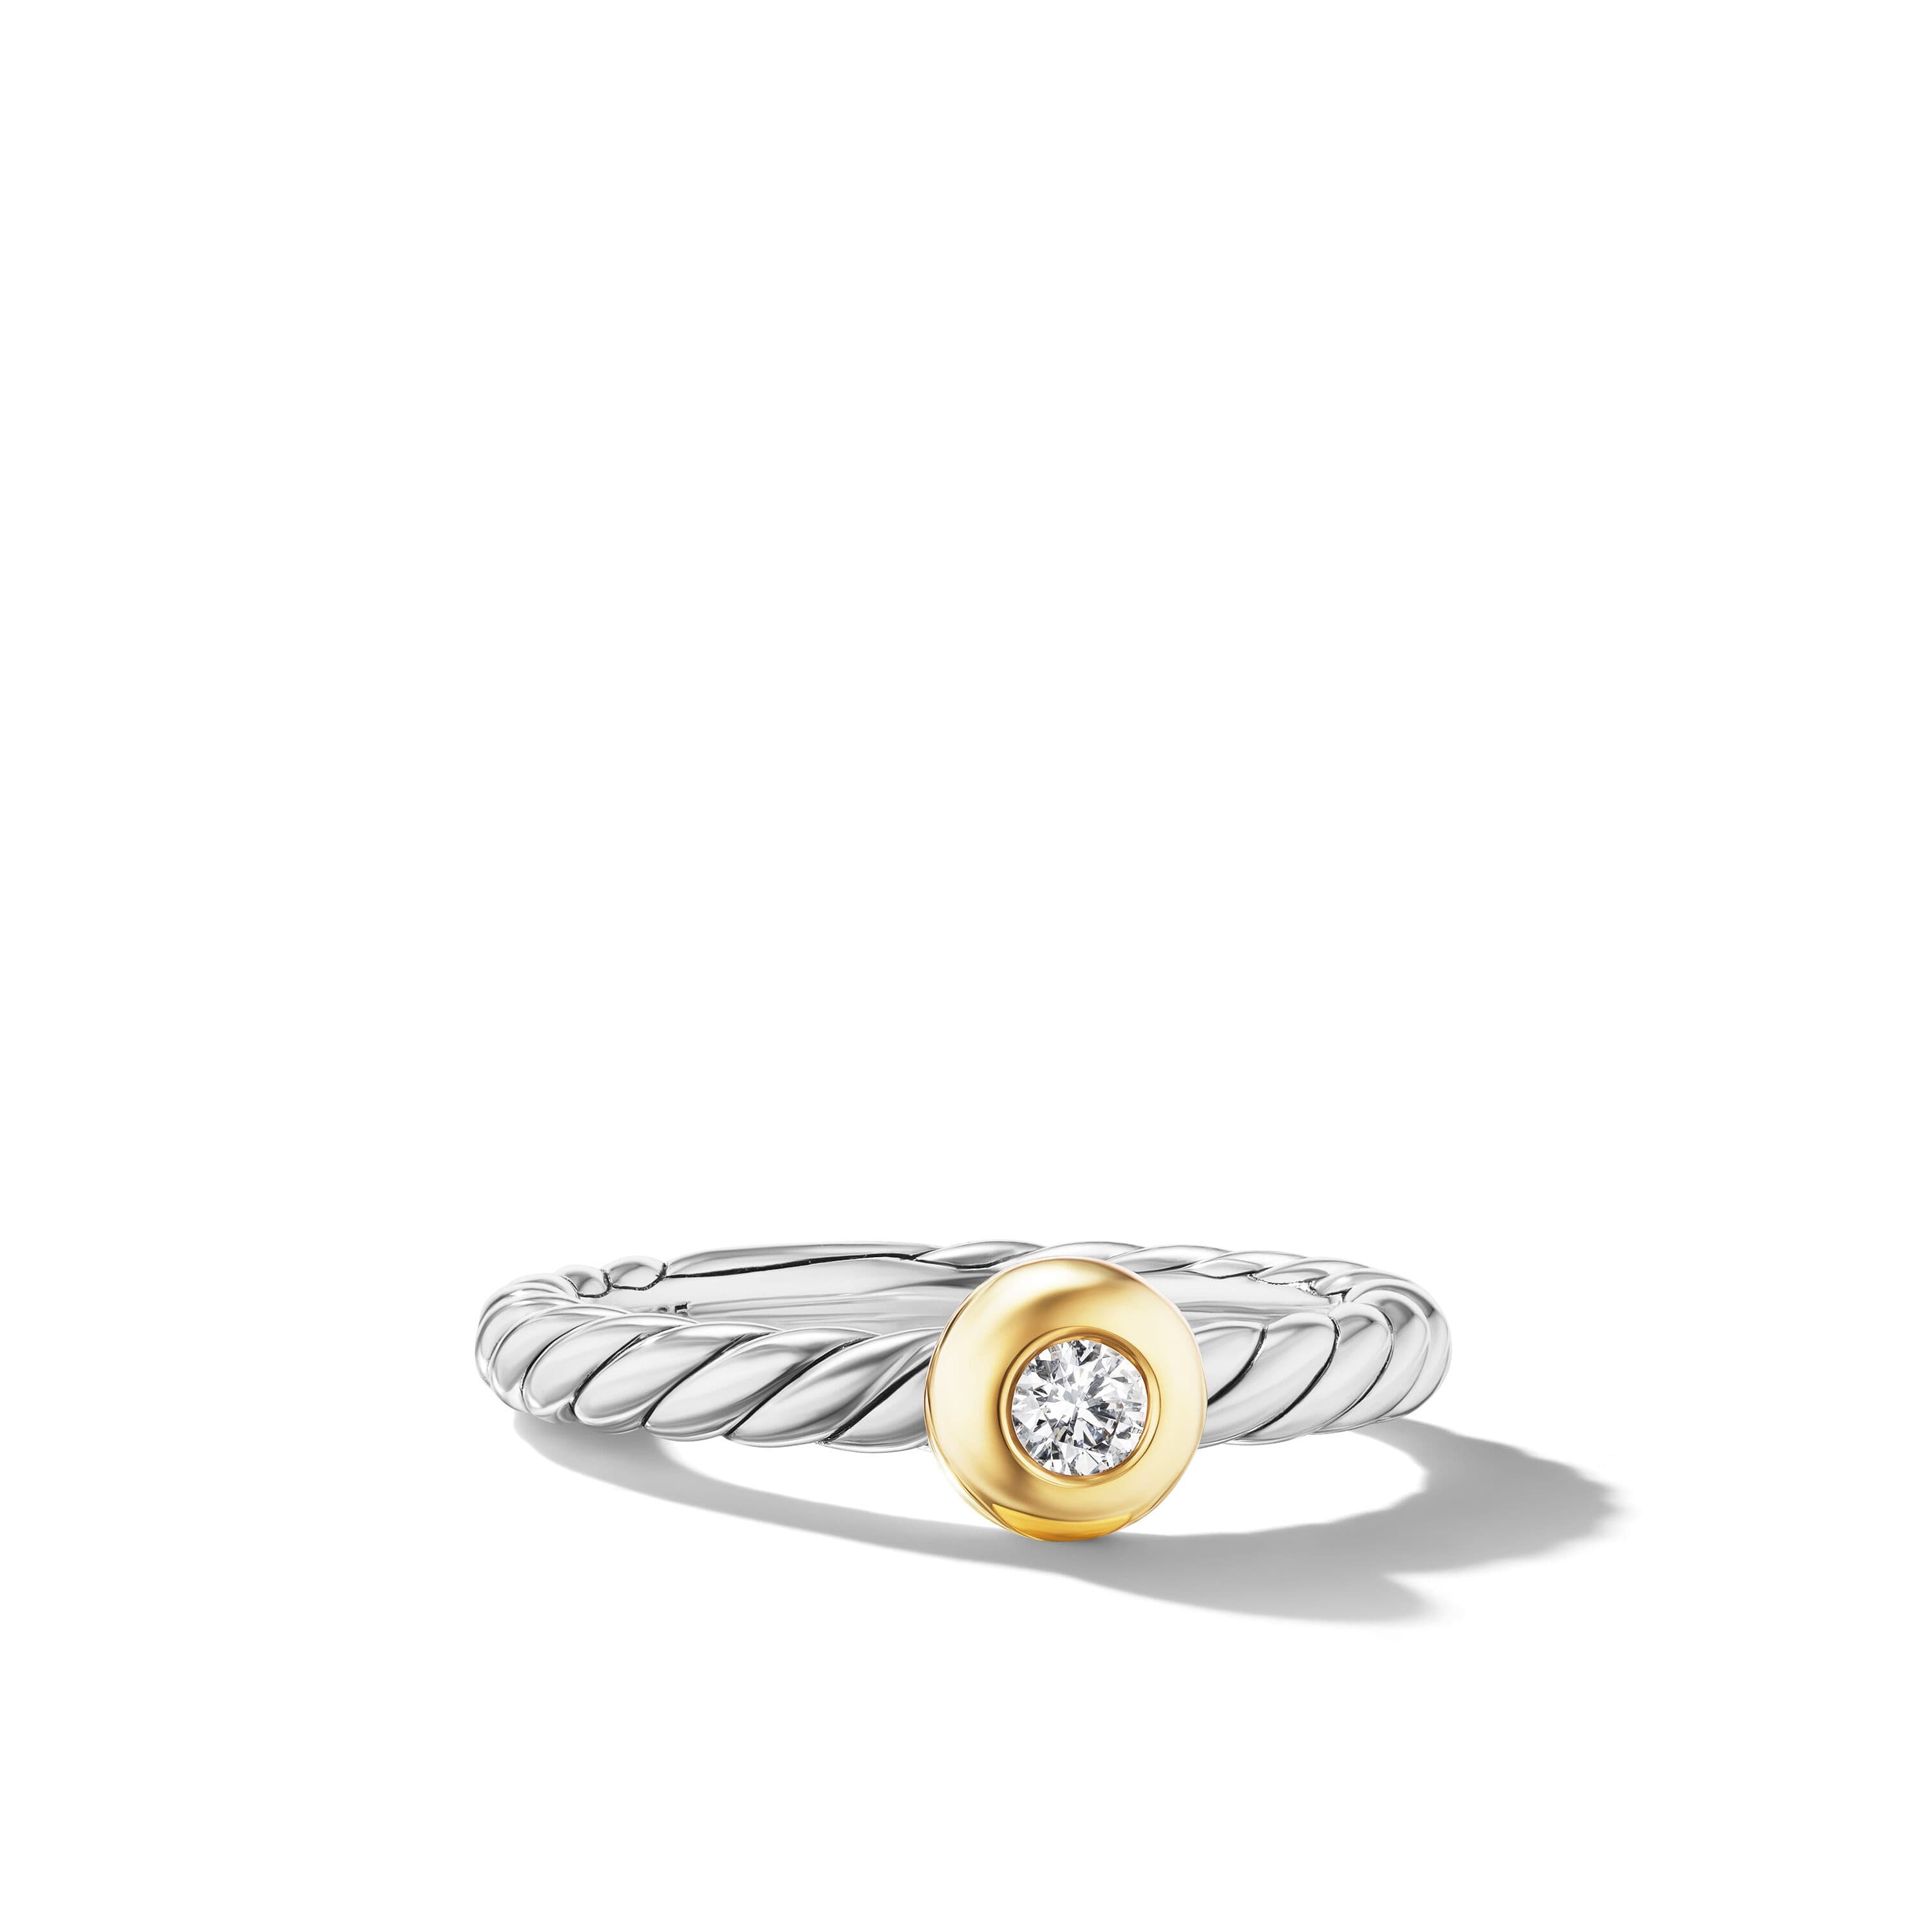 David Yurman Petite Cable Ring in Sterling Silver with 14K Yellow Gold and Diamond, Size 7 0